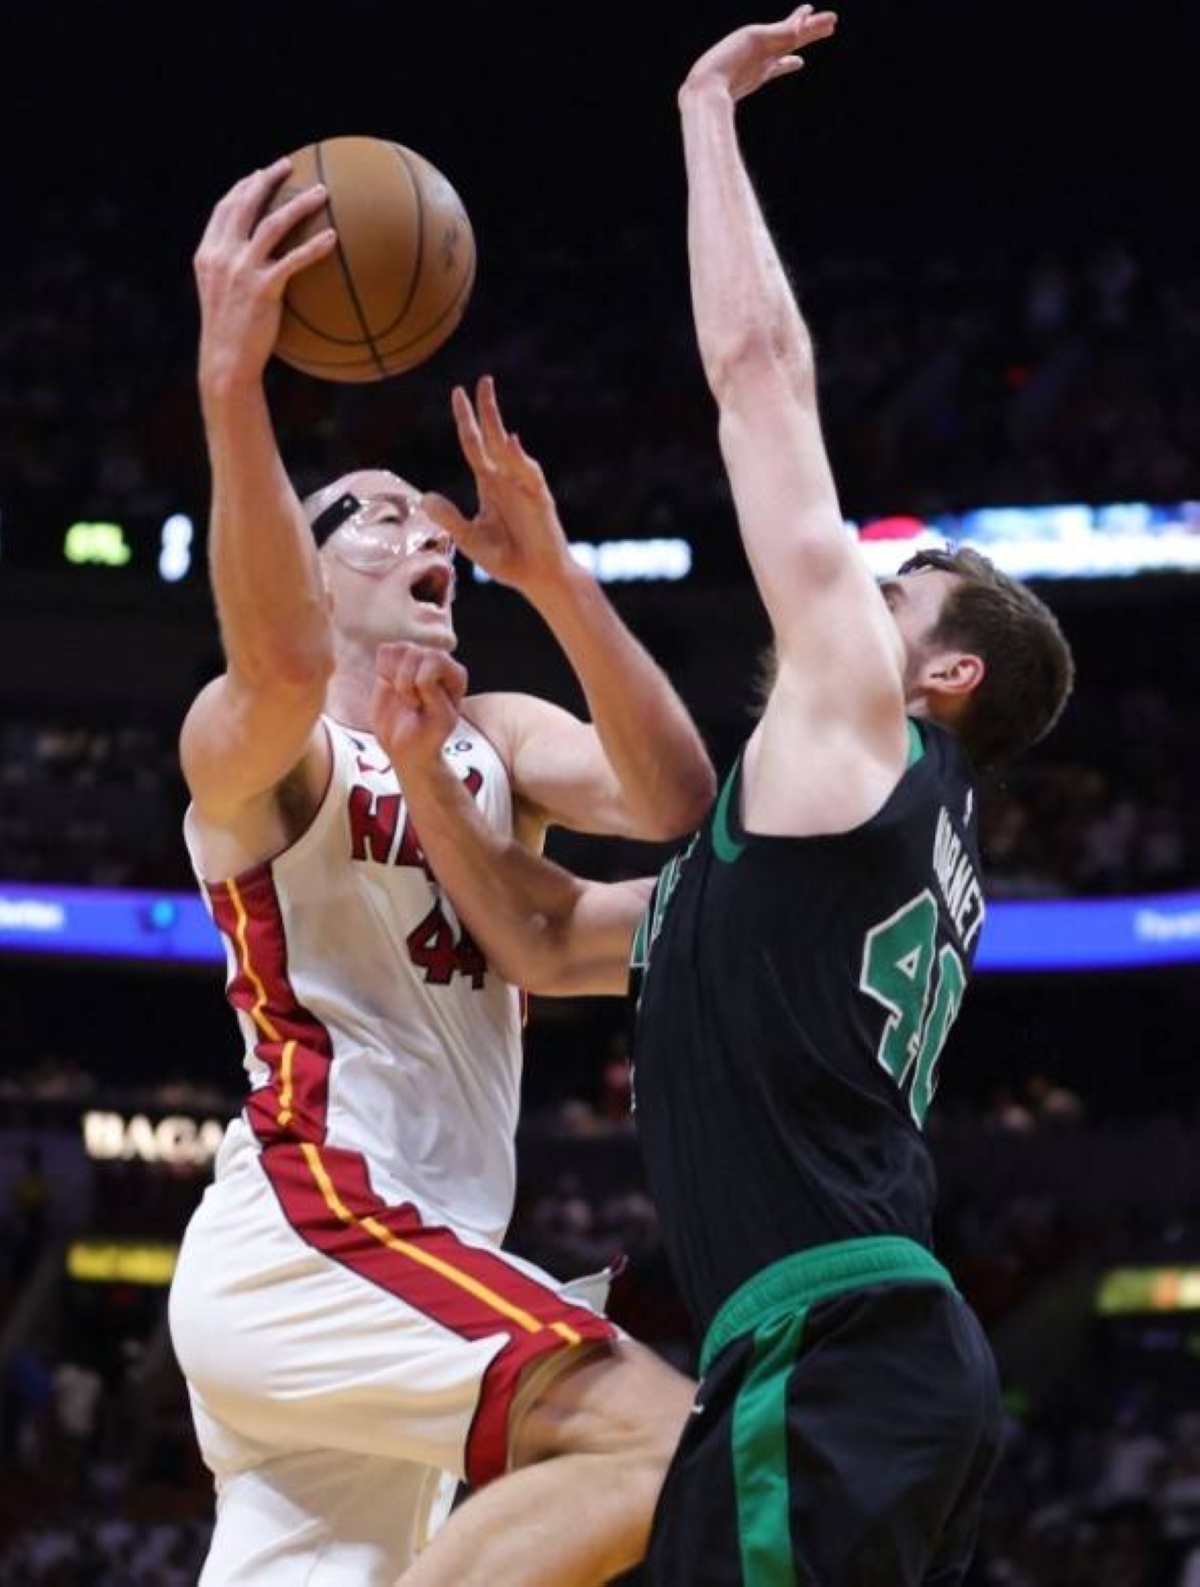 Cody Zeller of the Miami Heat drives to the basket against Luke Kornet of the Boston Celtics during the fourth quarter in Game 3 of the Eastern Conference Finals at Kaseya Center on Sunday, May 21, 2023, in Miami, Florida. AFP PHOTO